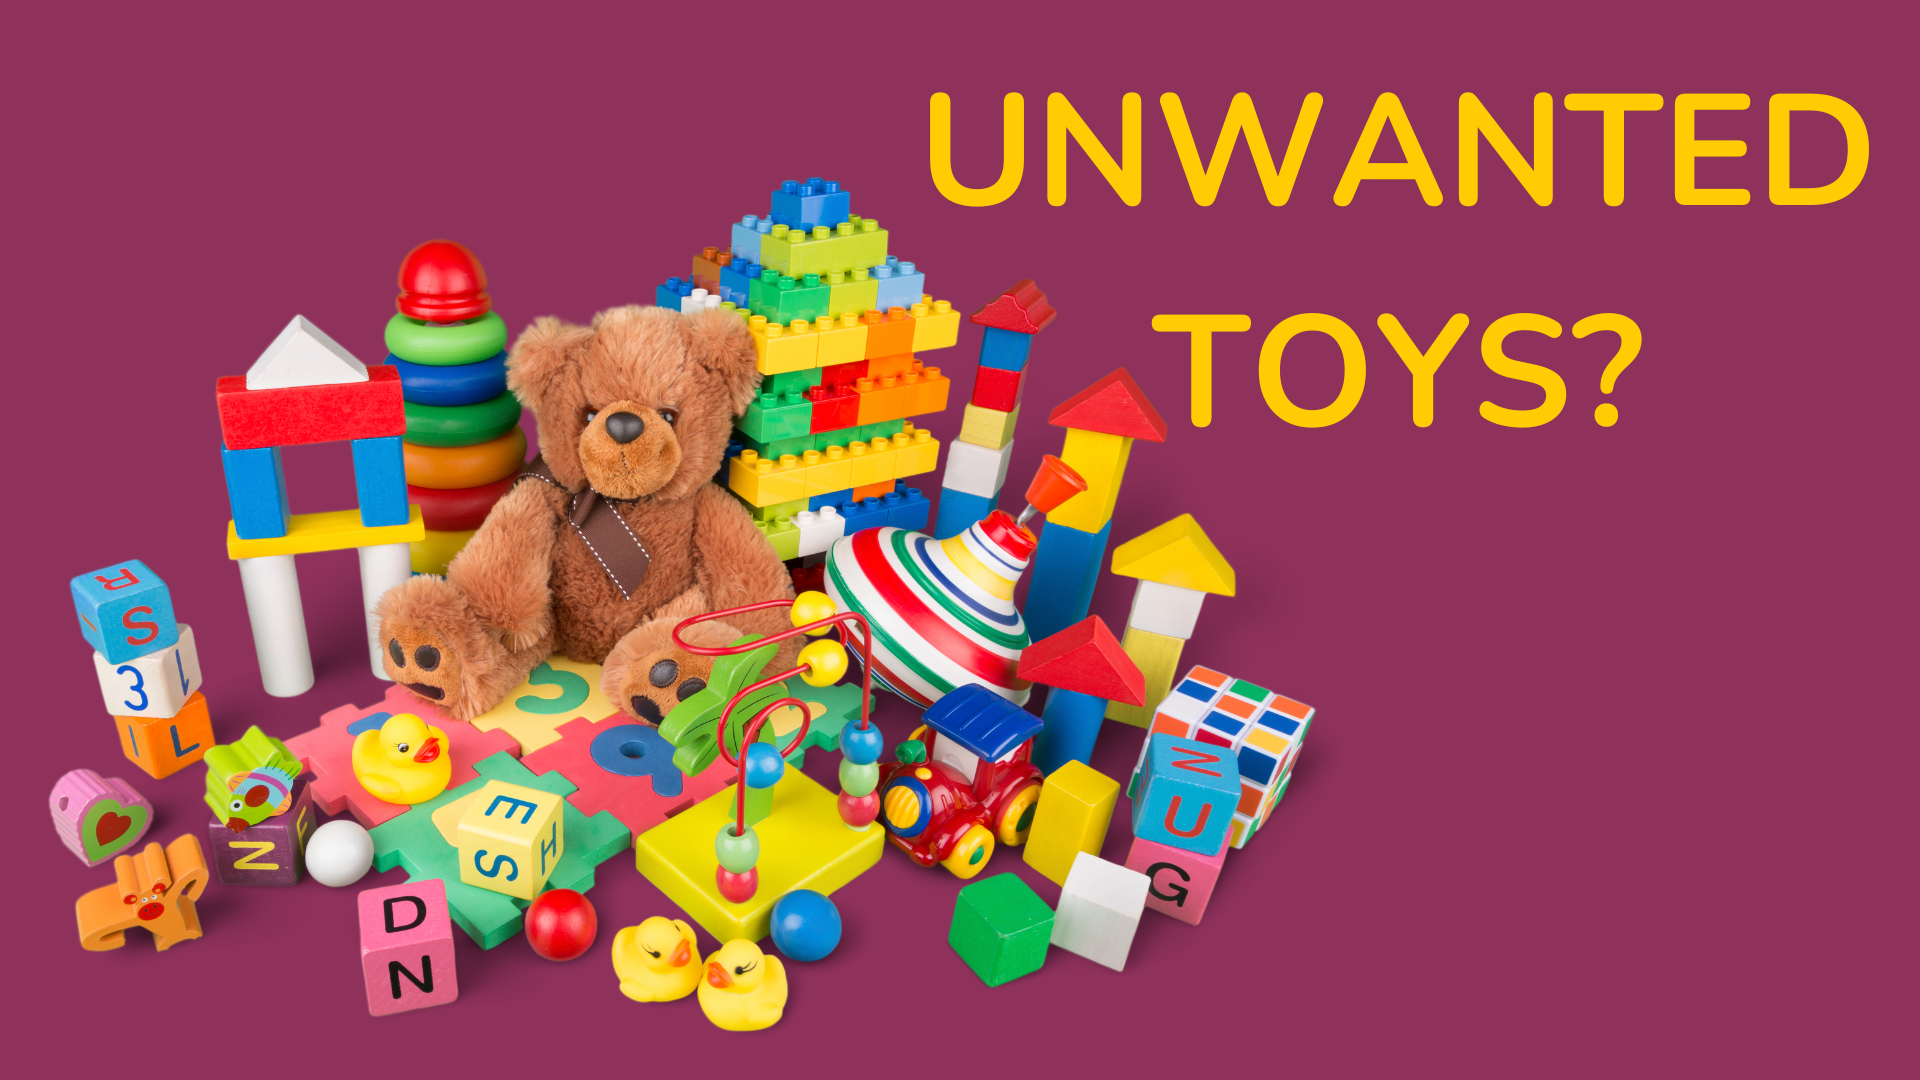 Better Toy Alternatives for your Unwanted Christmas Gift